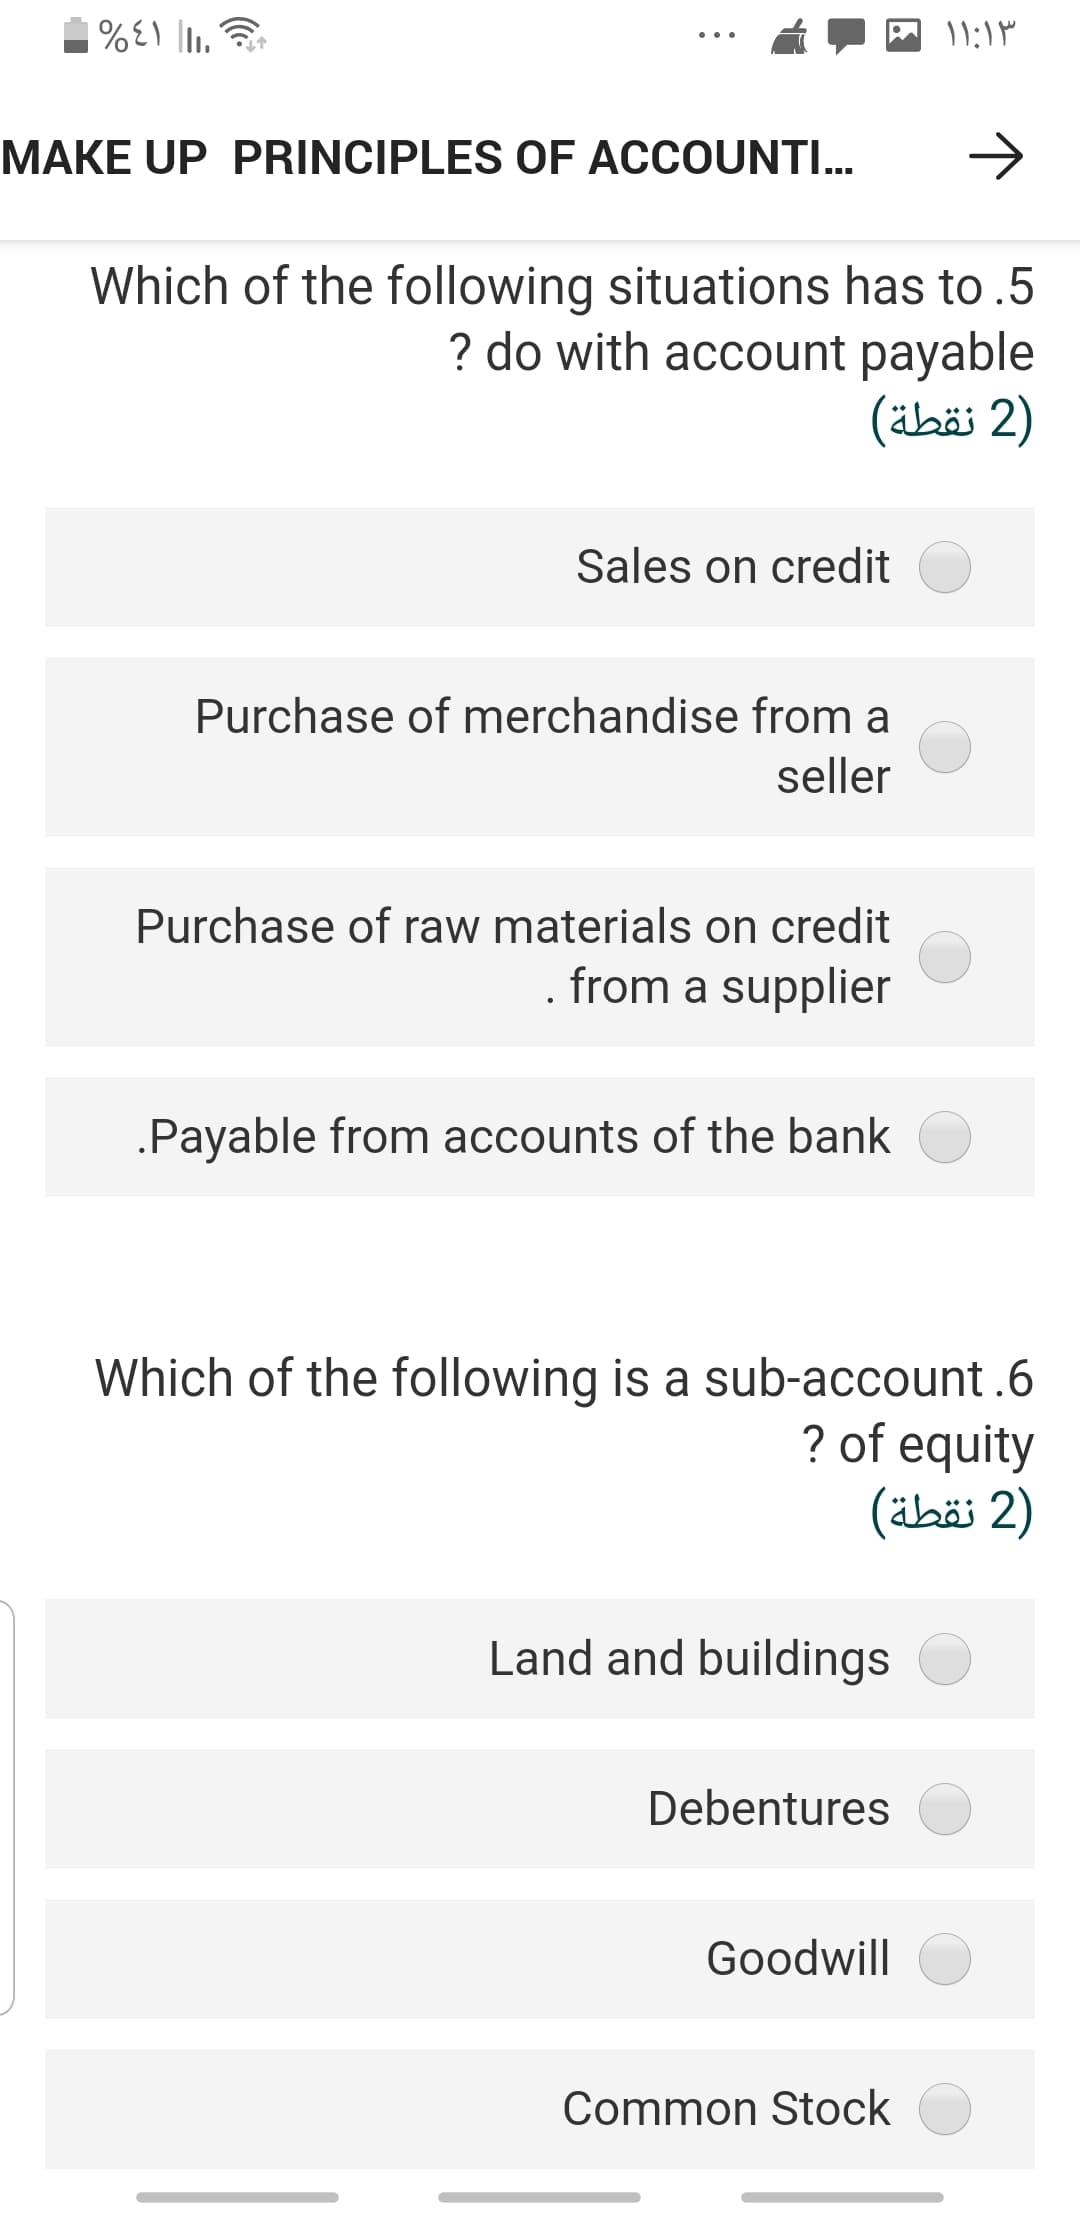 "I| 13%
MAKE UP PRINCIPLES OF ACCOUNTI...
Which of the following situations has to .5
? do with account payable
(äbäi 2)
Sales on credit
Purchase of merchandise from a
seller
Purchase of raw materials on credit
from a supplier
.Payable from accounts of the bank
Which of the following is a sub-account.6
? of equity
(äbä 2)
Land and buildings
Debentures
Goodwill
Common Stock
